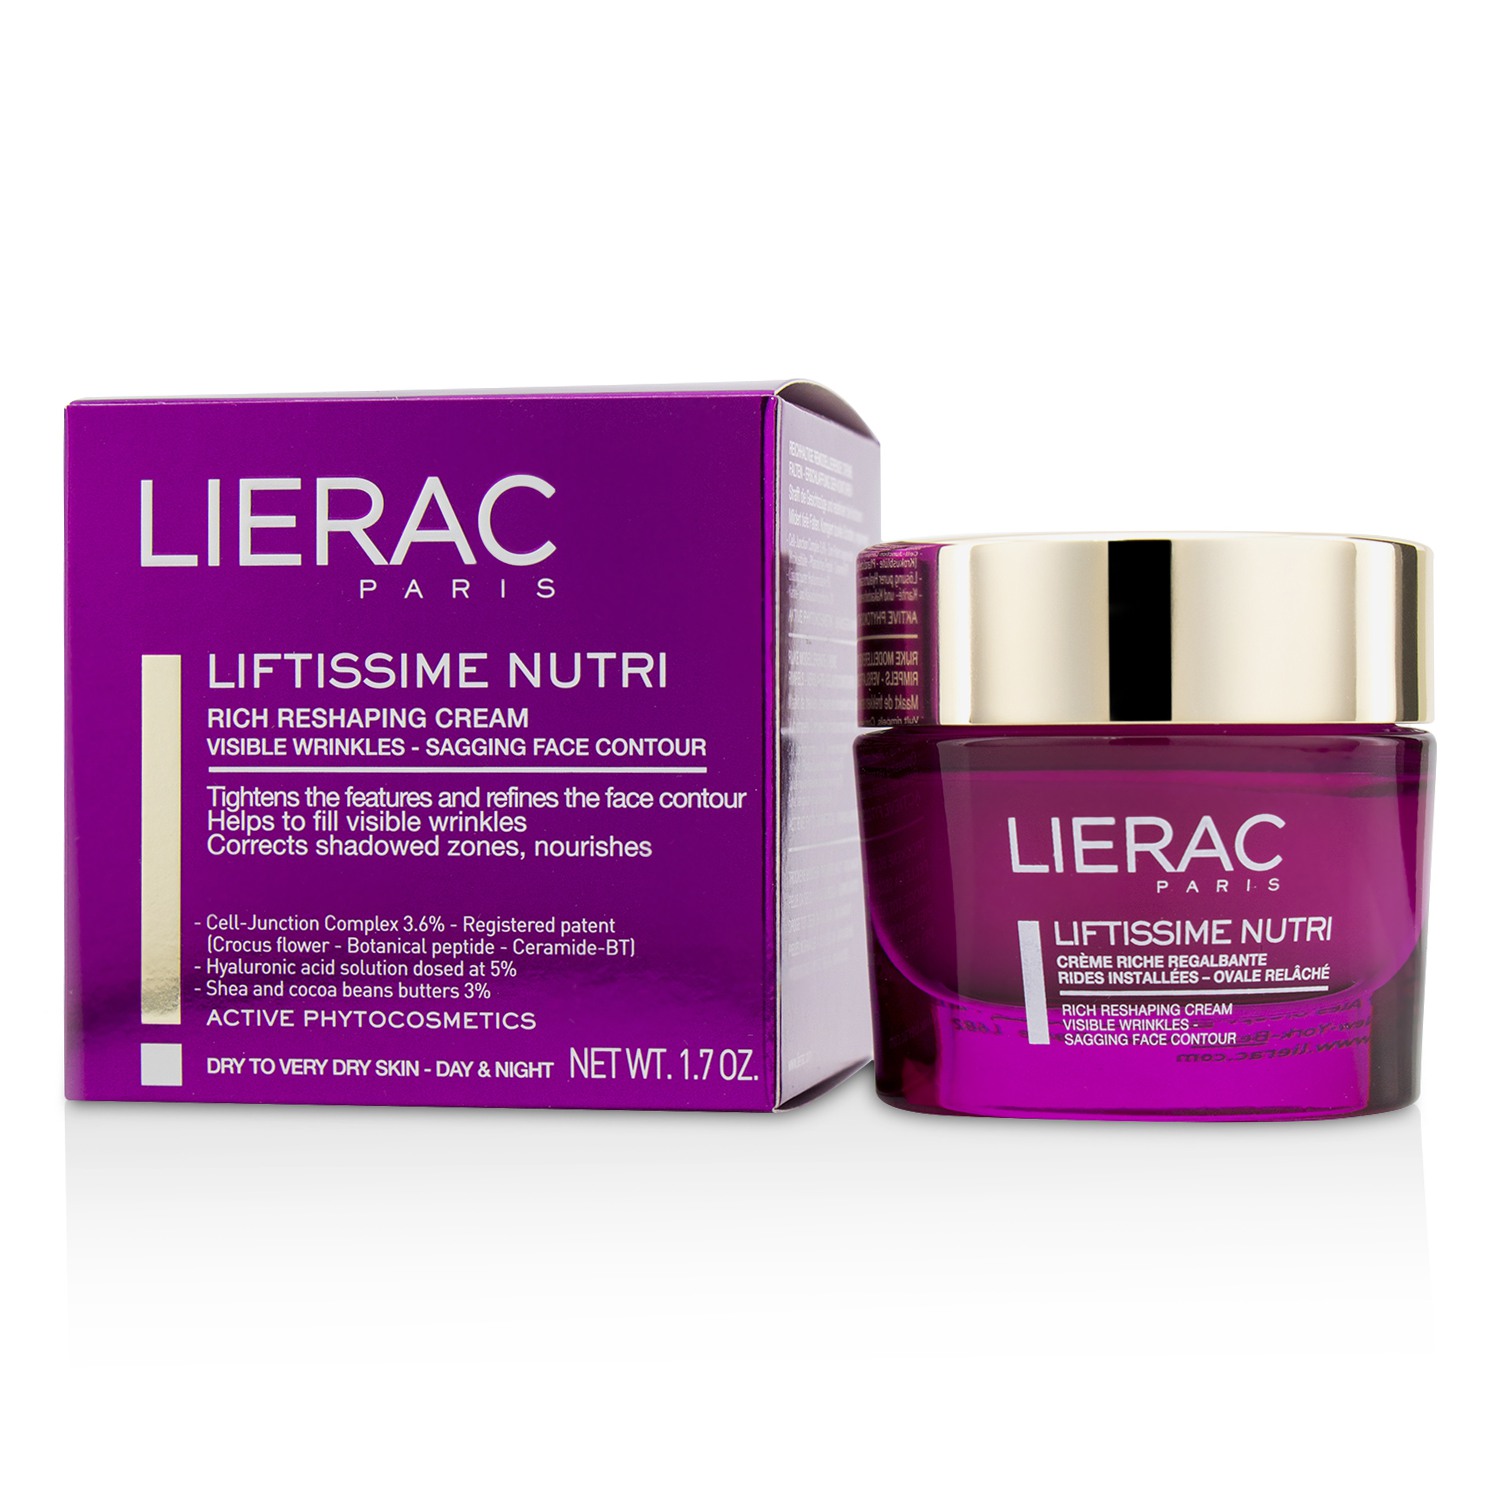 Liftissime Nutri Rich Reshaping Cream (For Dry To Very Dry Skin) Lierac Image